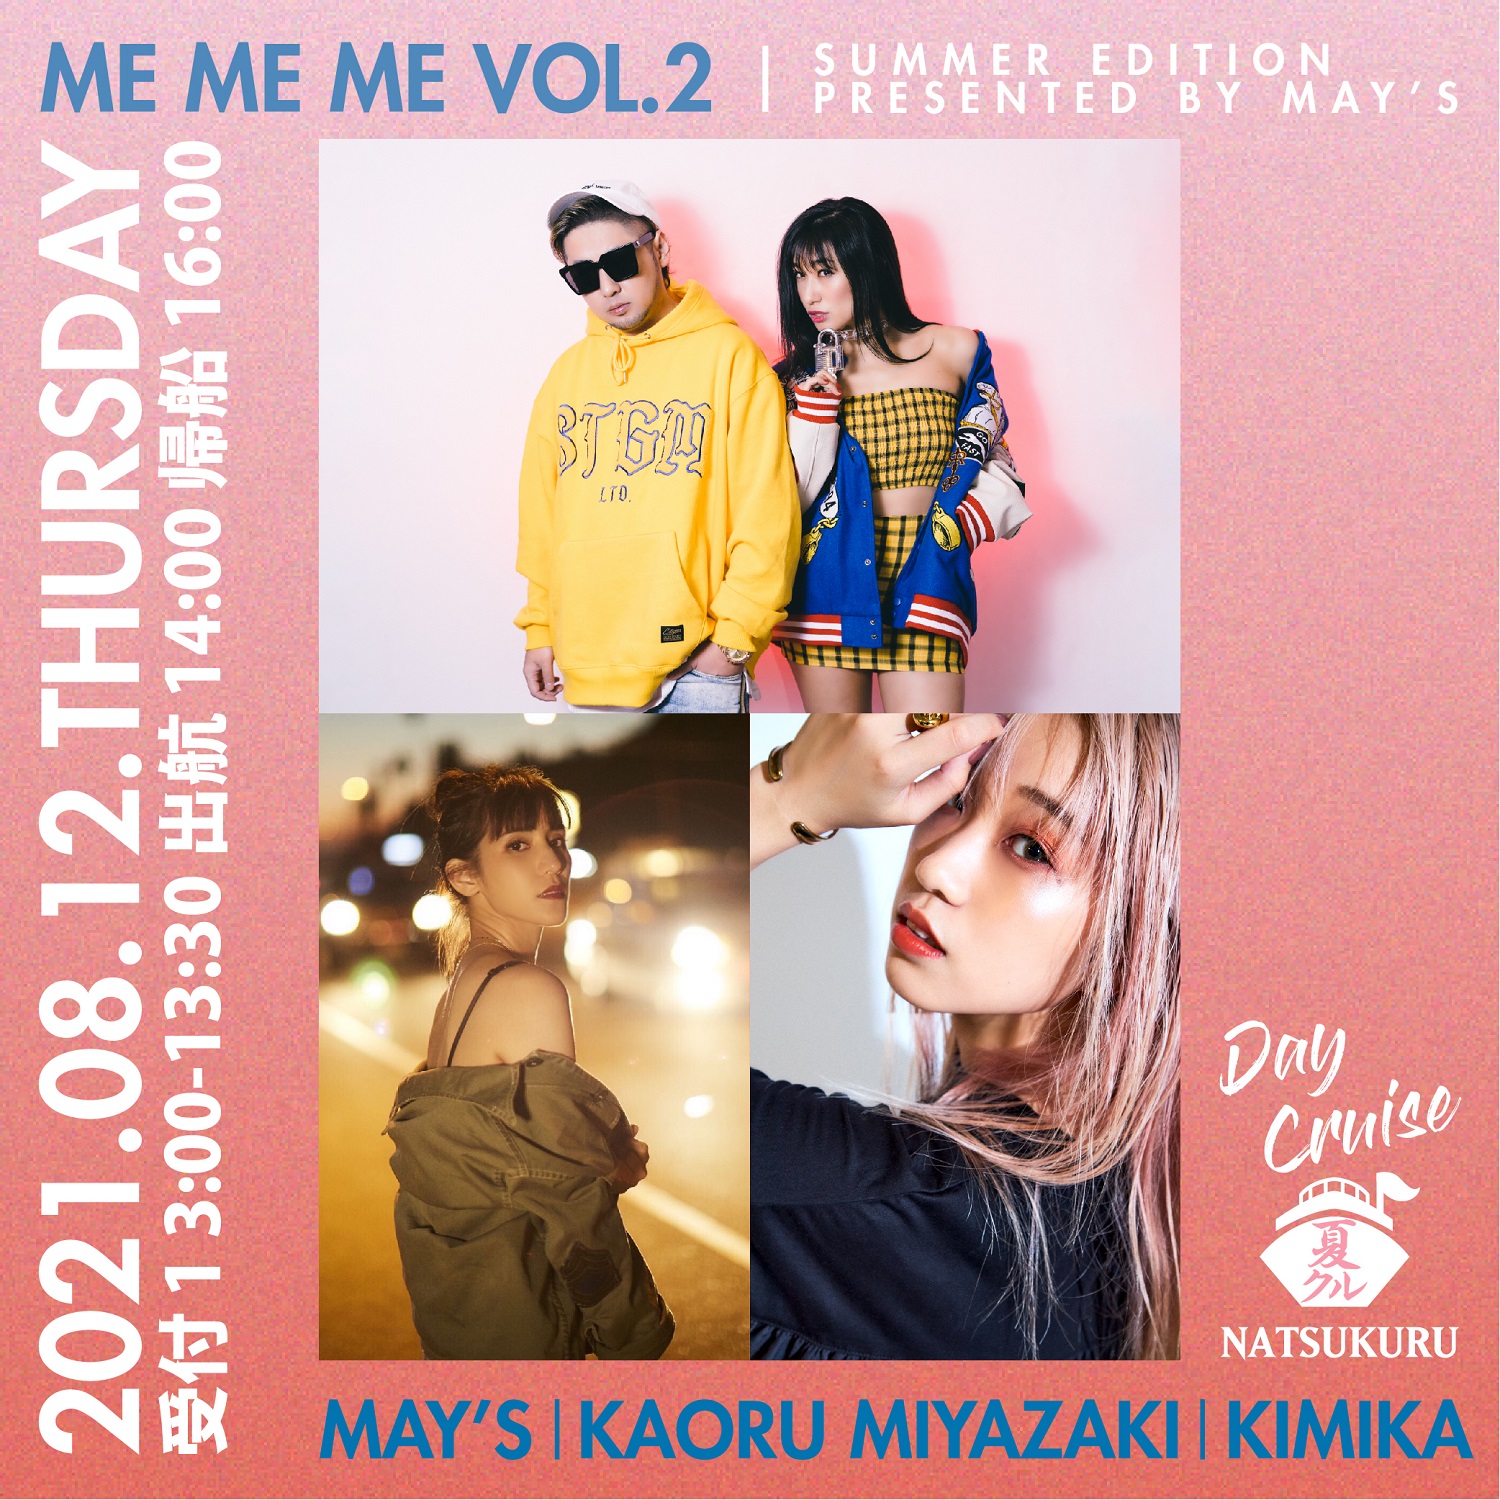 ME ME ME Vol.2 Summer Edition presented by MAY'S